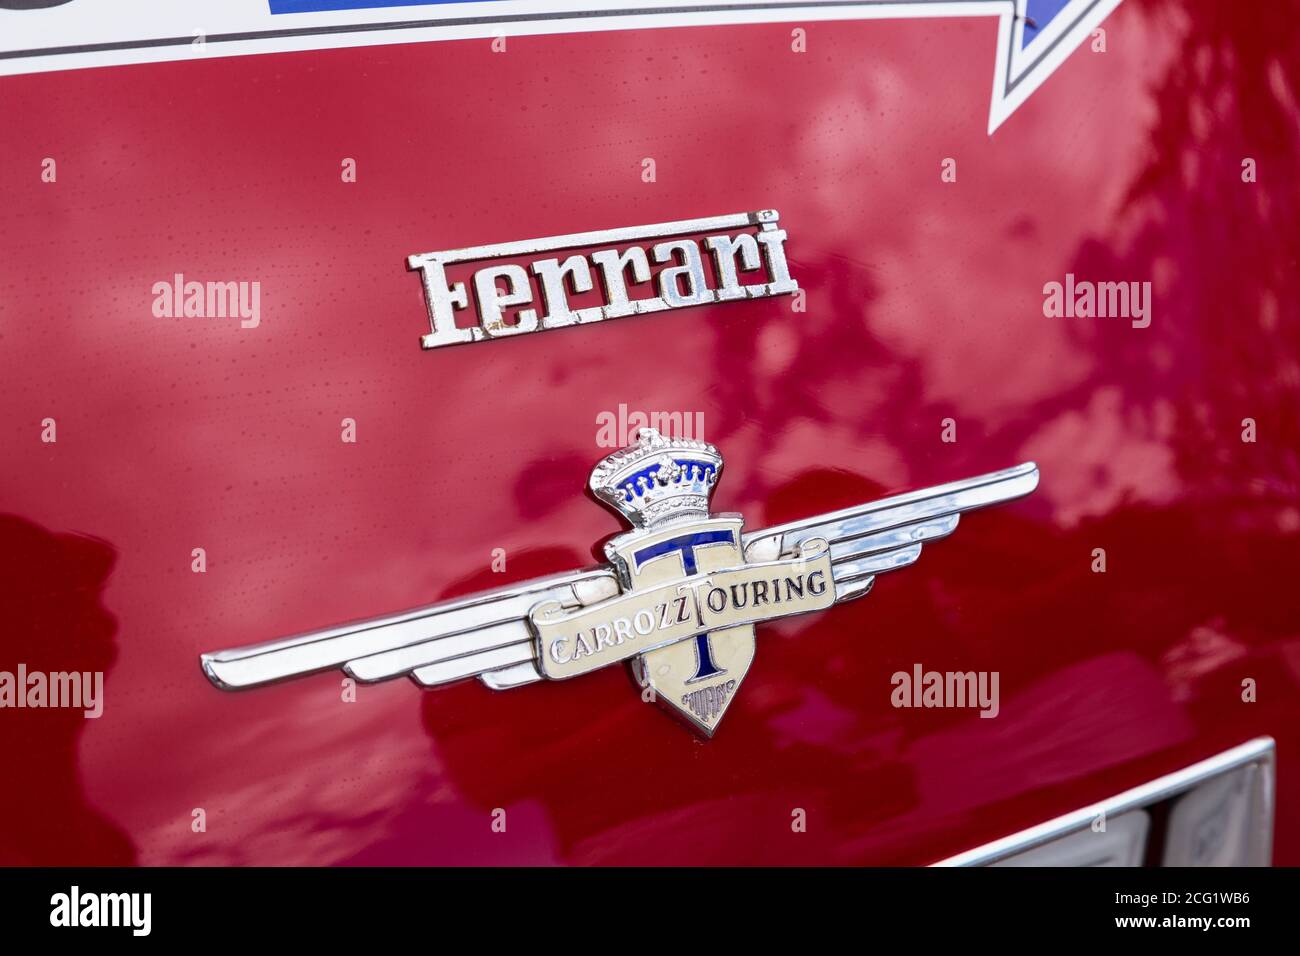 Carrozzeria Touring badge on a 1950 Ferrari 166 MM LeMans Berlinneta.  Only 6 of these cars were produced. Stock Photo